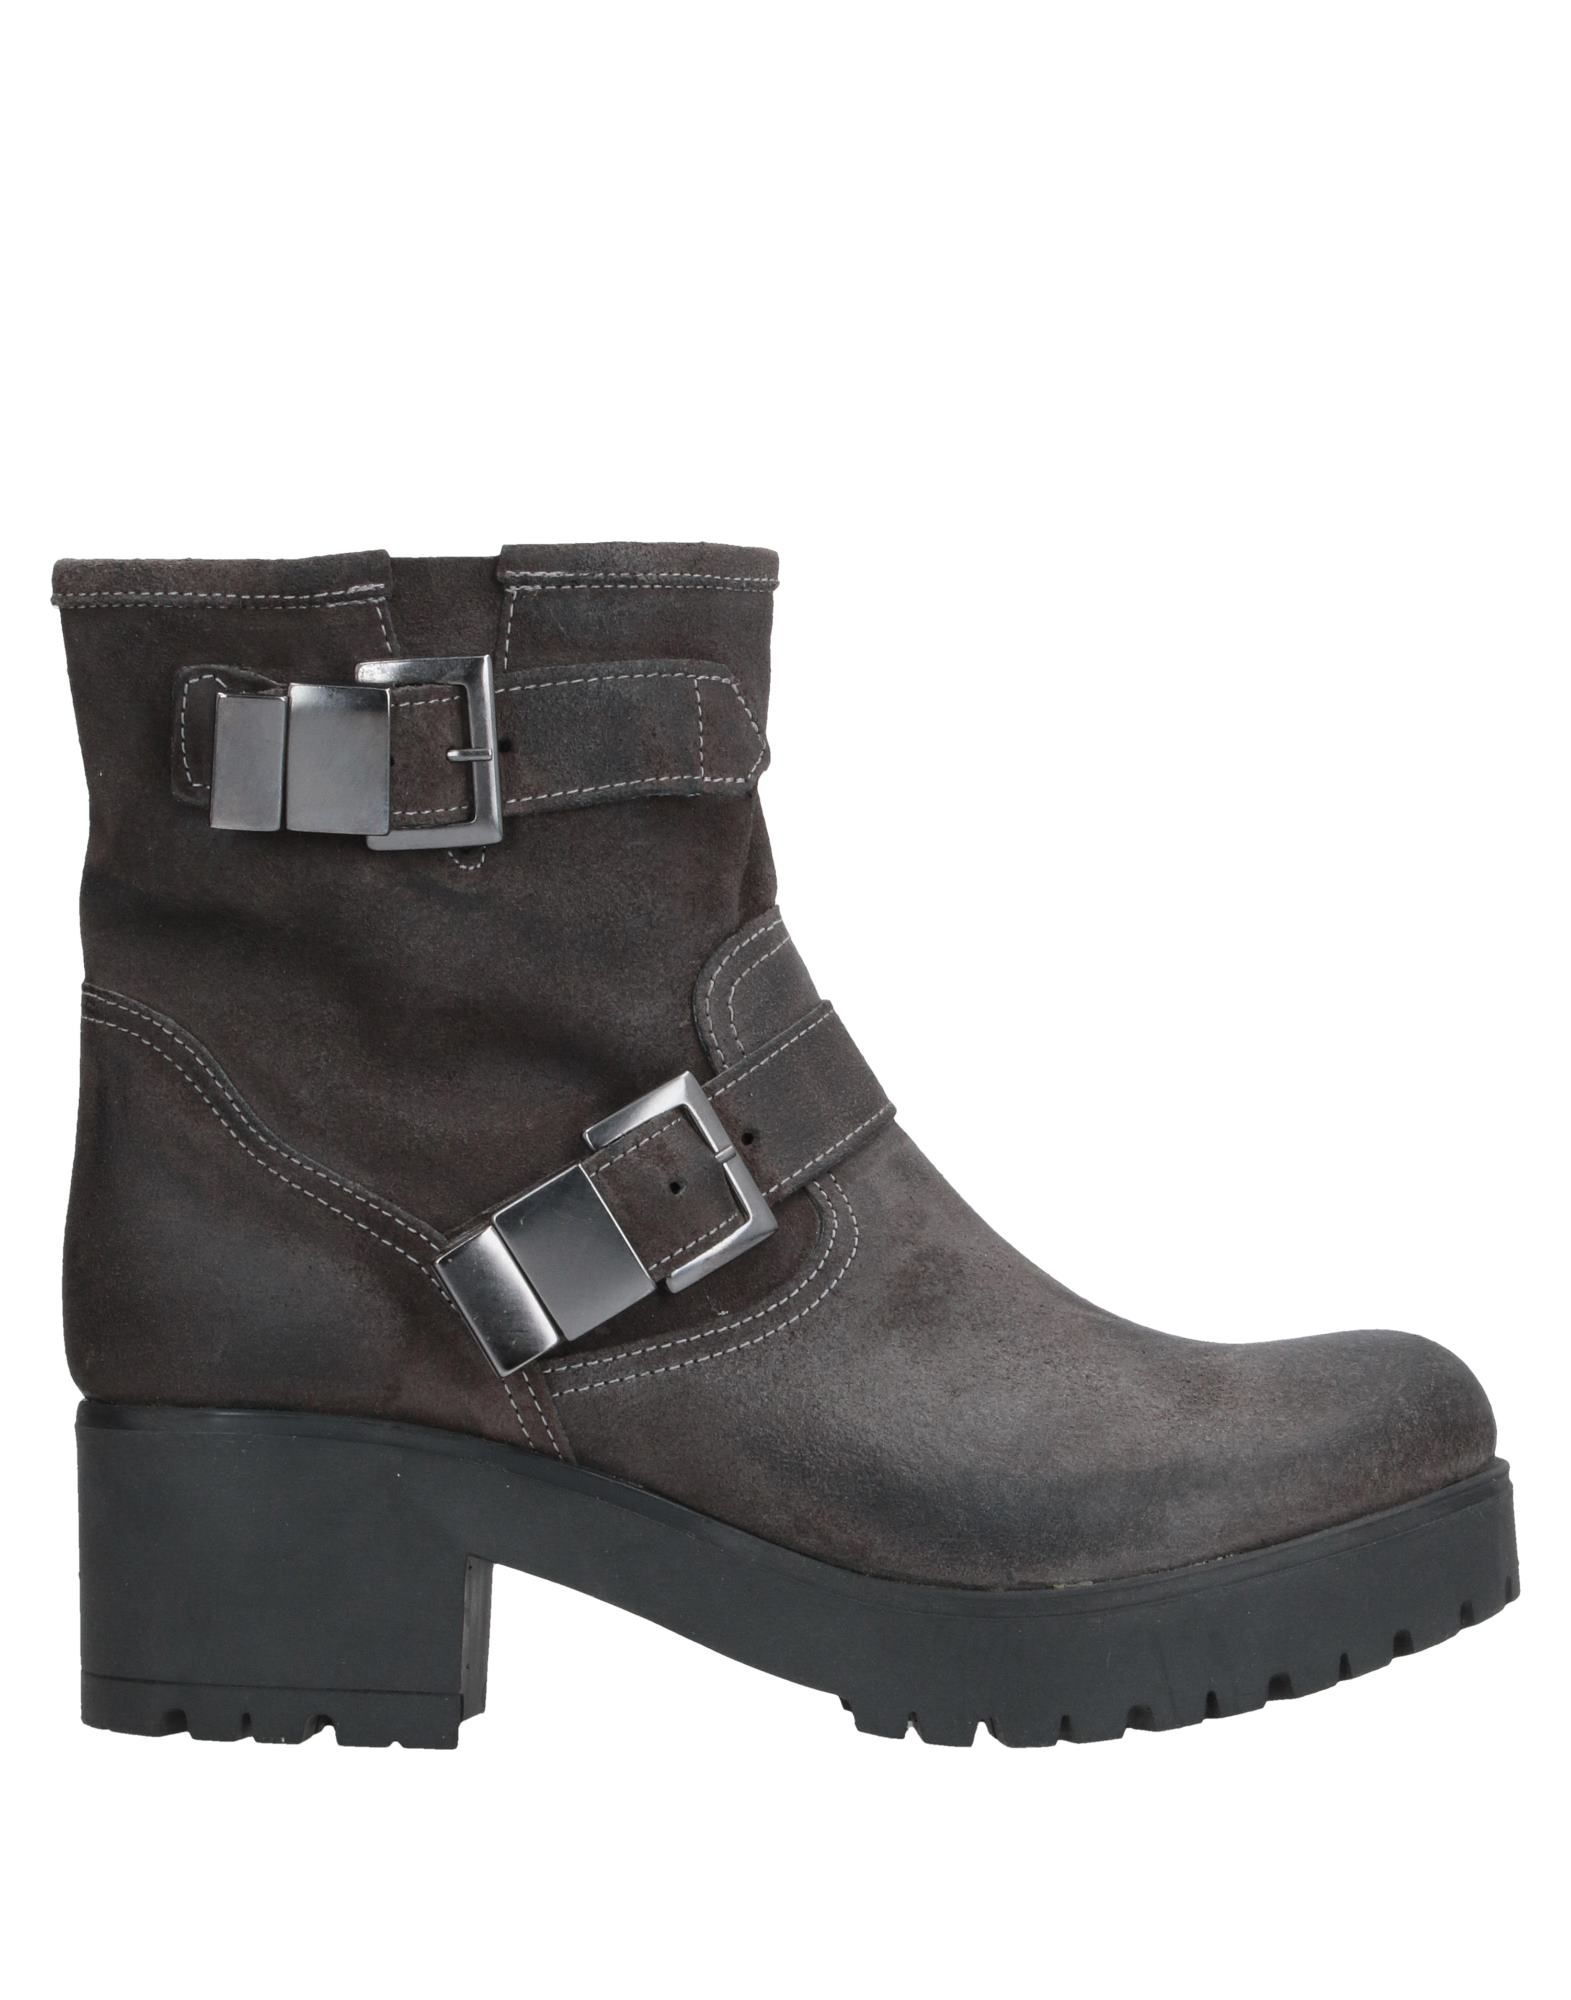 LAVORAZIONE ARTIGIANA LAVORAZIONE ARTIGIANA Ankle boots from yoox.com ...